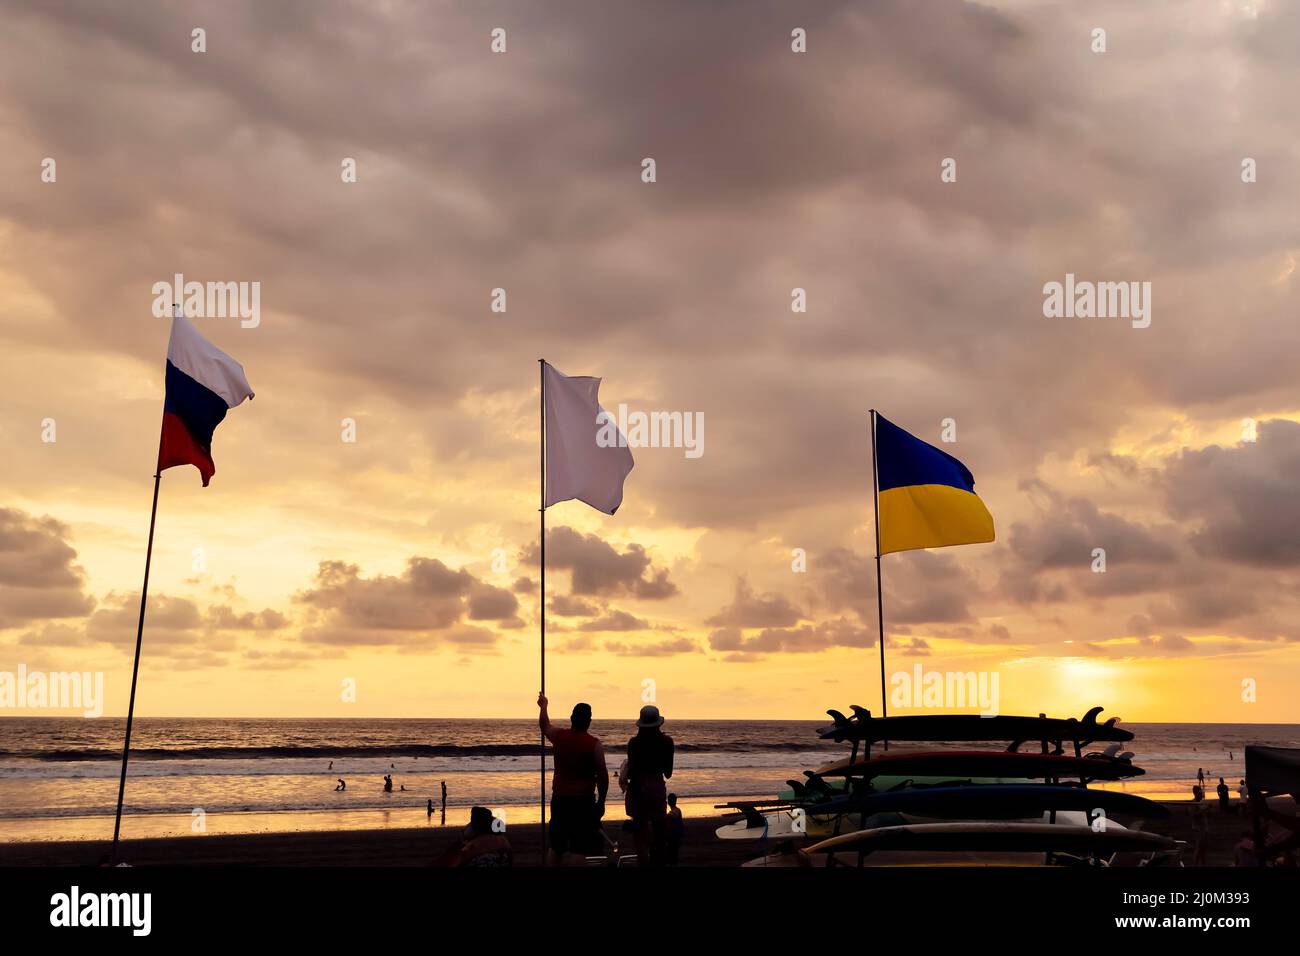 Ukrainian and Russian flags on sky background at sunset on the beach. Stock Photo